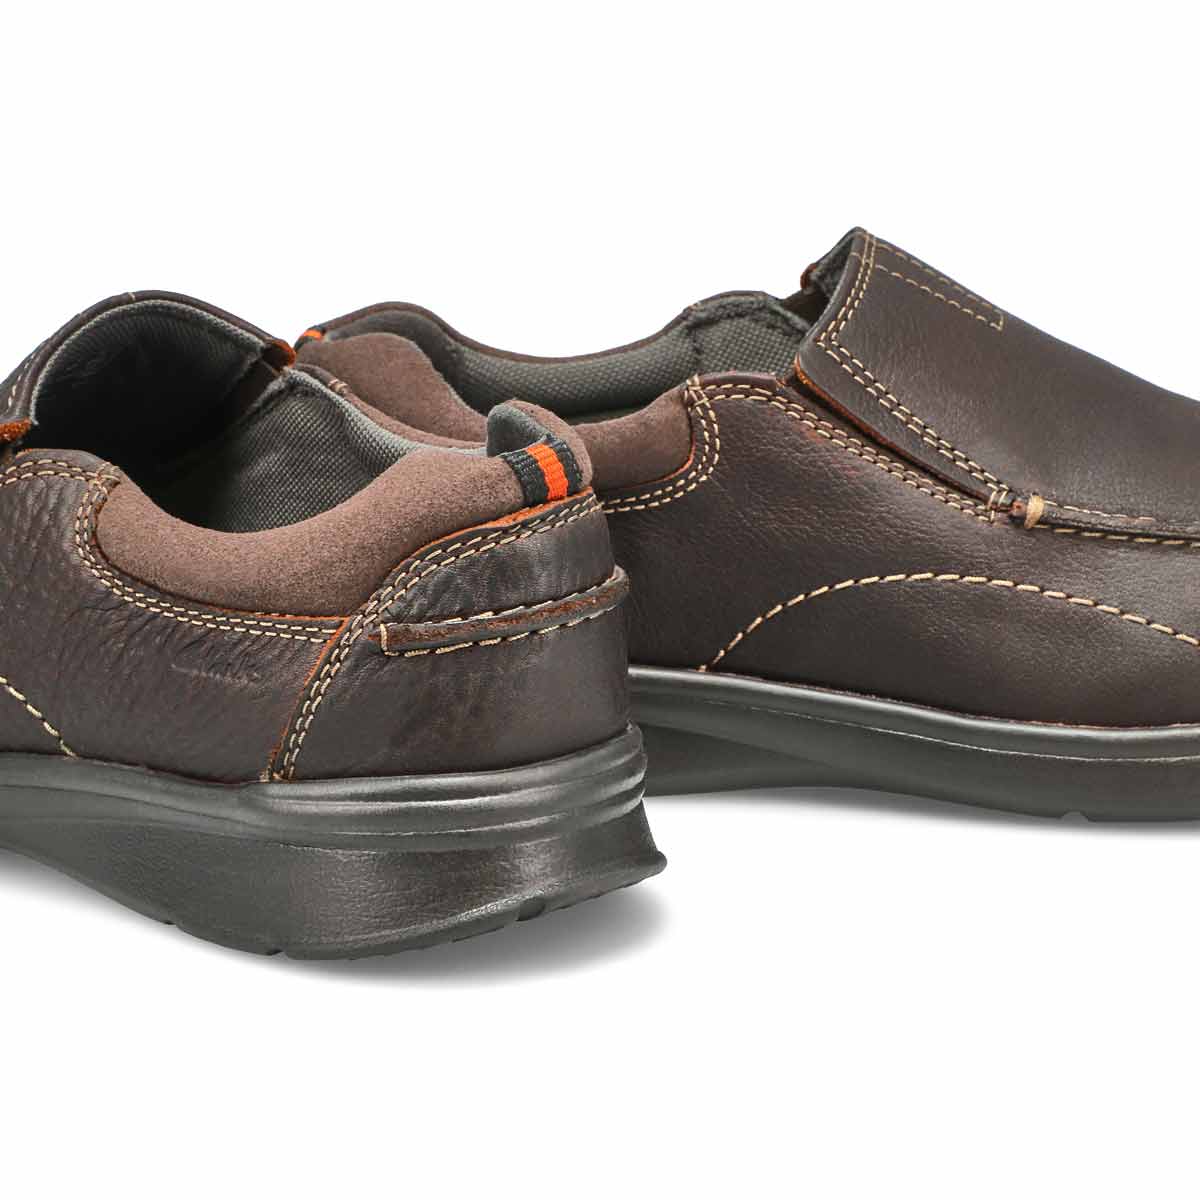 Men's Cotrell Step Wide Shoe - Brown